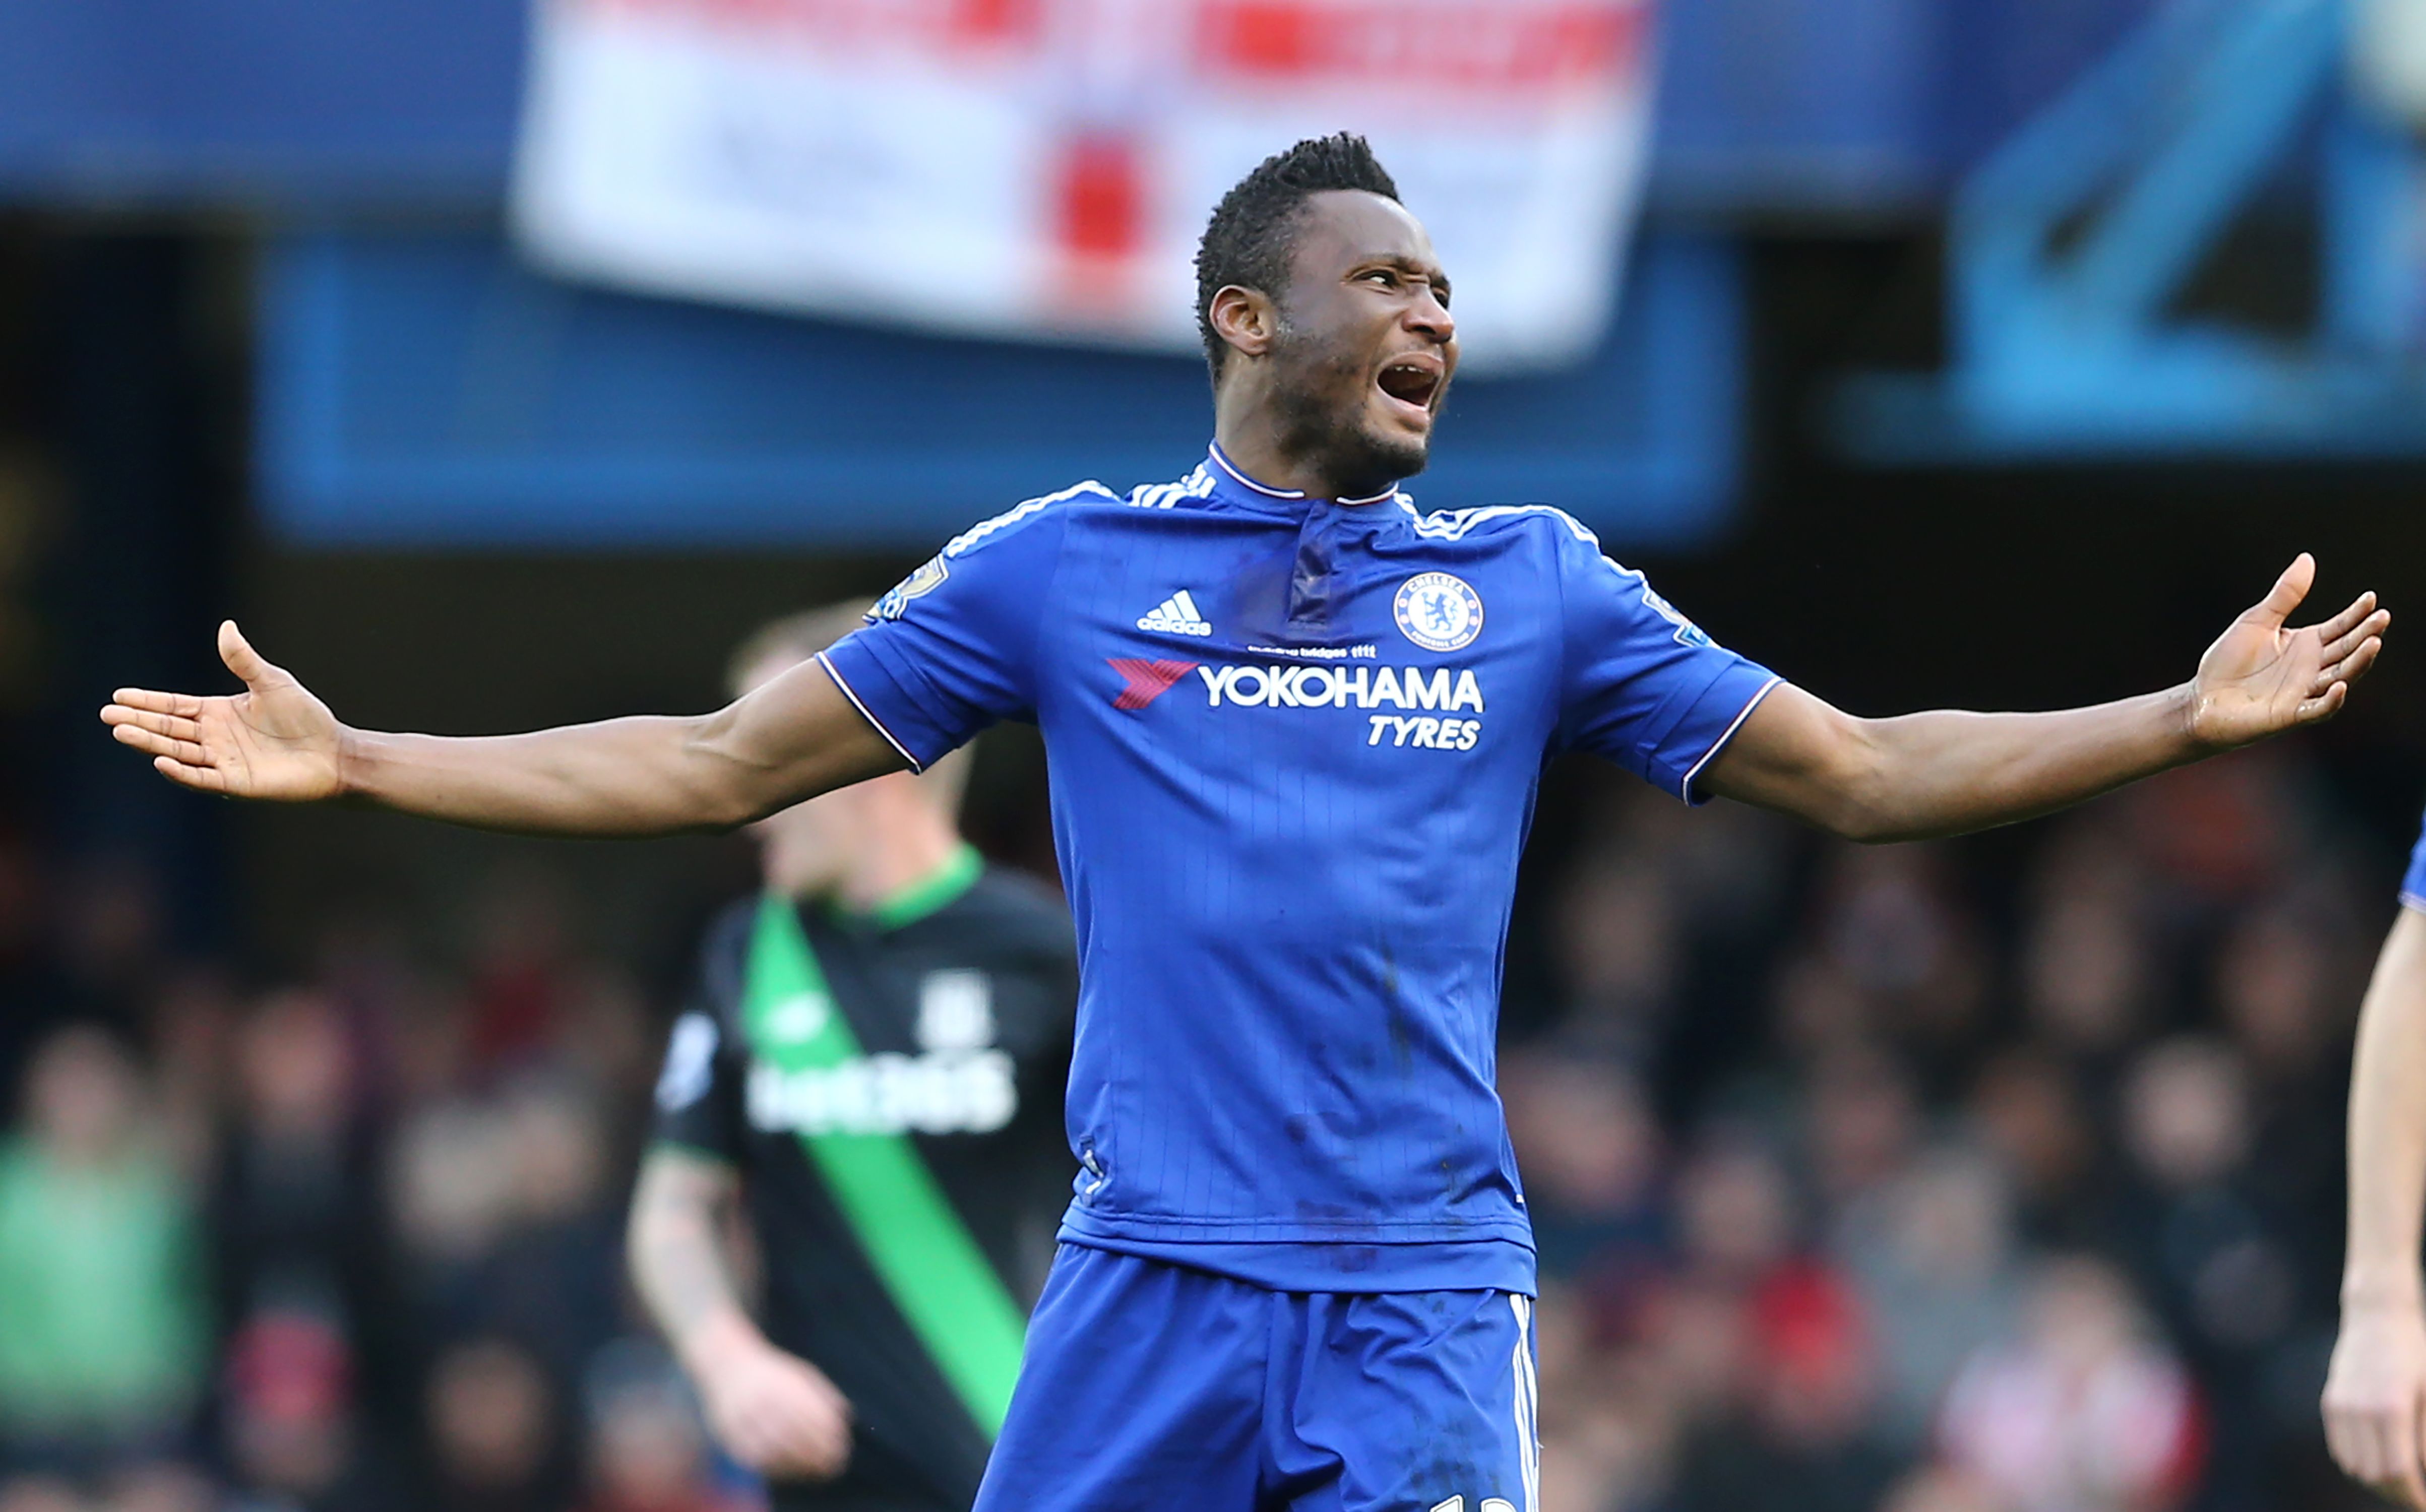 John Obi Mikel has excelled since being restored to the starting line-up under Guus Hiddink. Photo: AFP